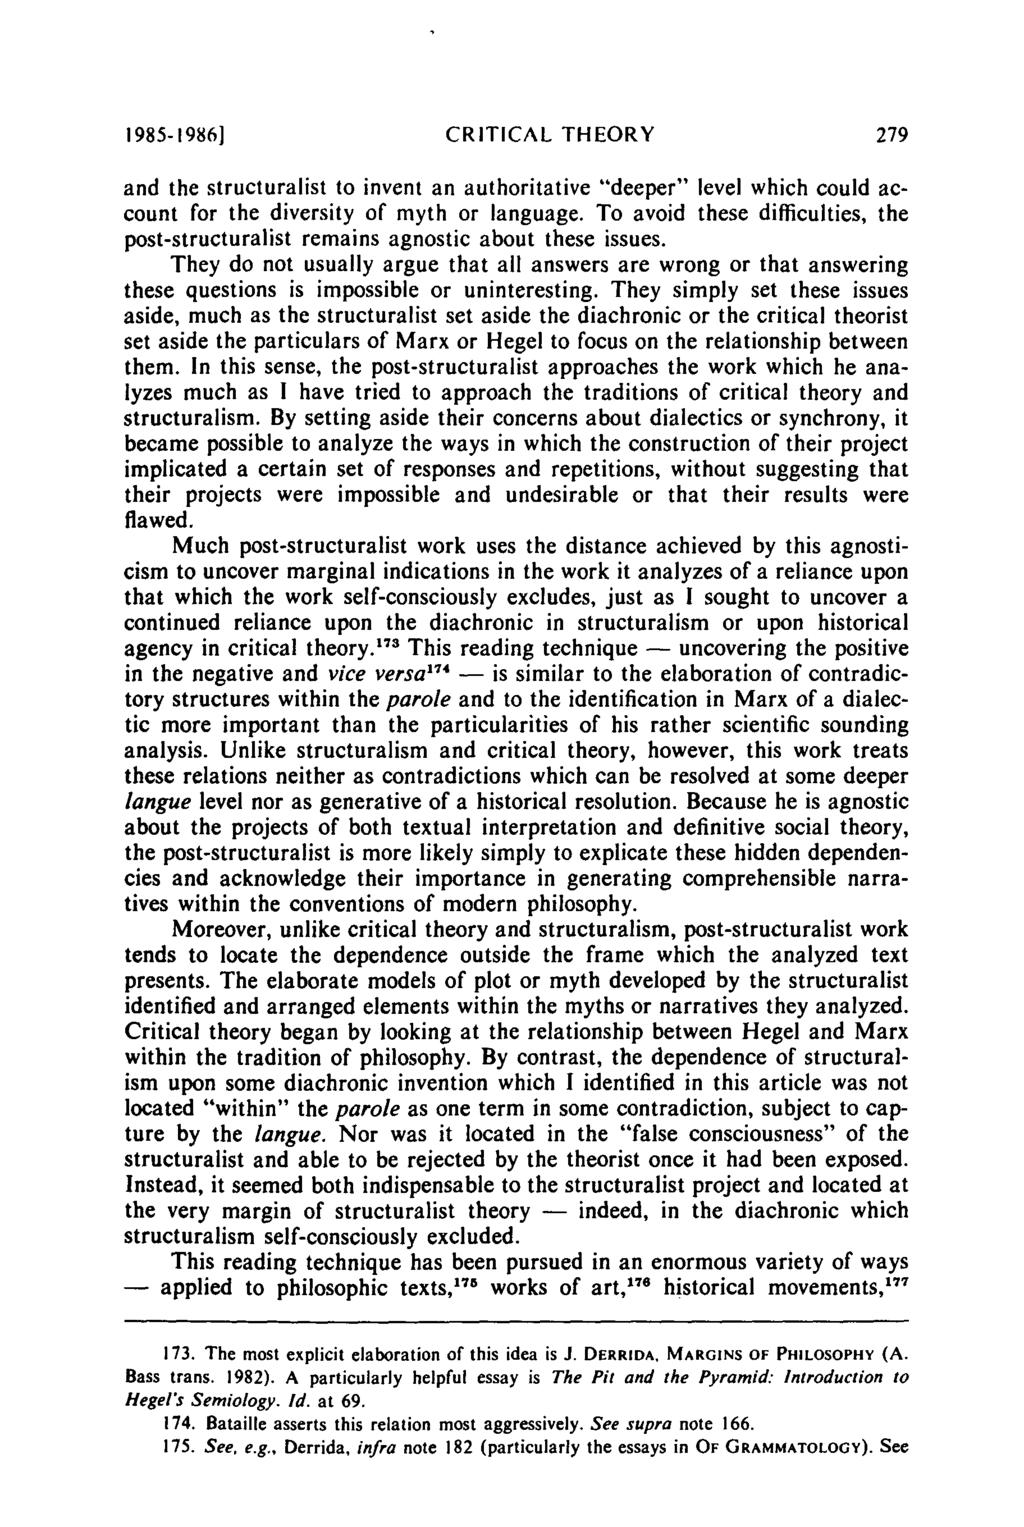 1985-1986] CRITICAL THEORY and the structuralist to invent an authoritative "deeper" level which could account for the diversity of myth or language.